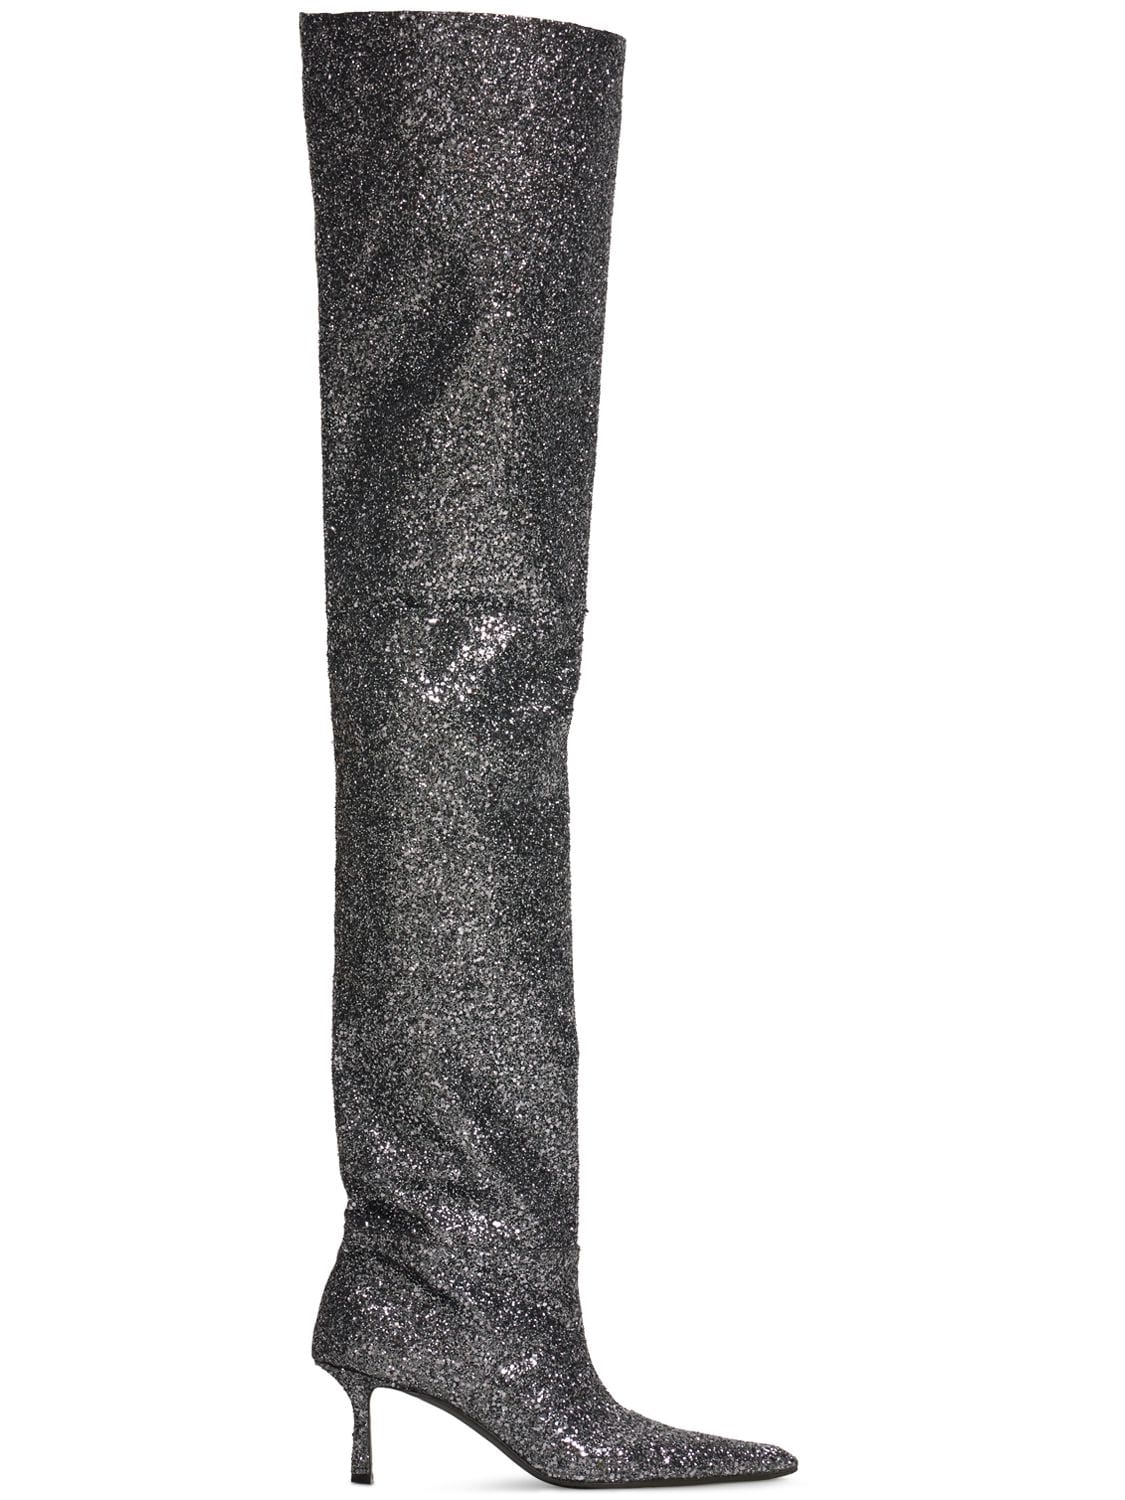 65mm Viola Glittered Over-the-knee Boots